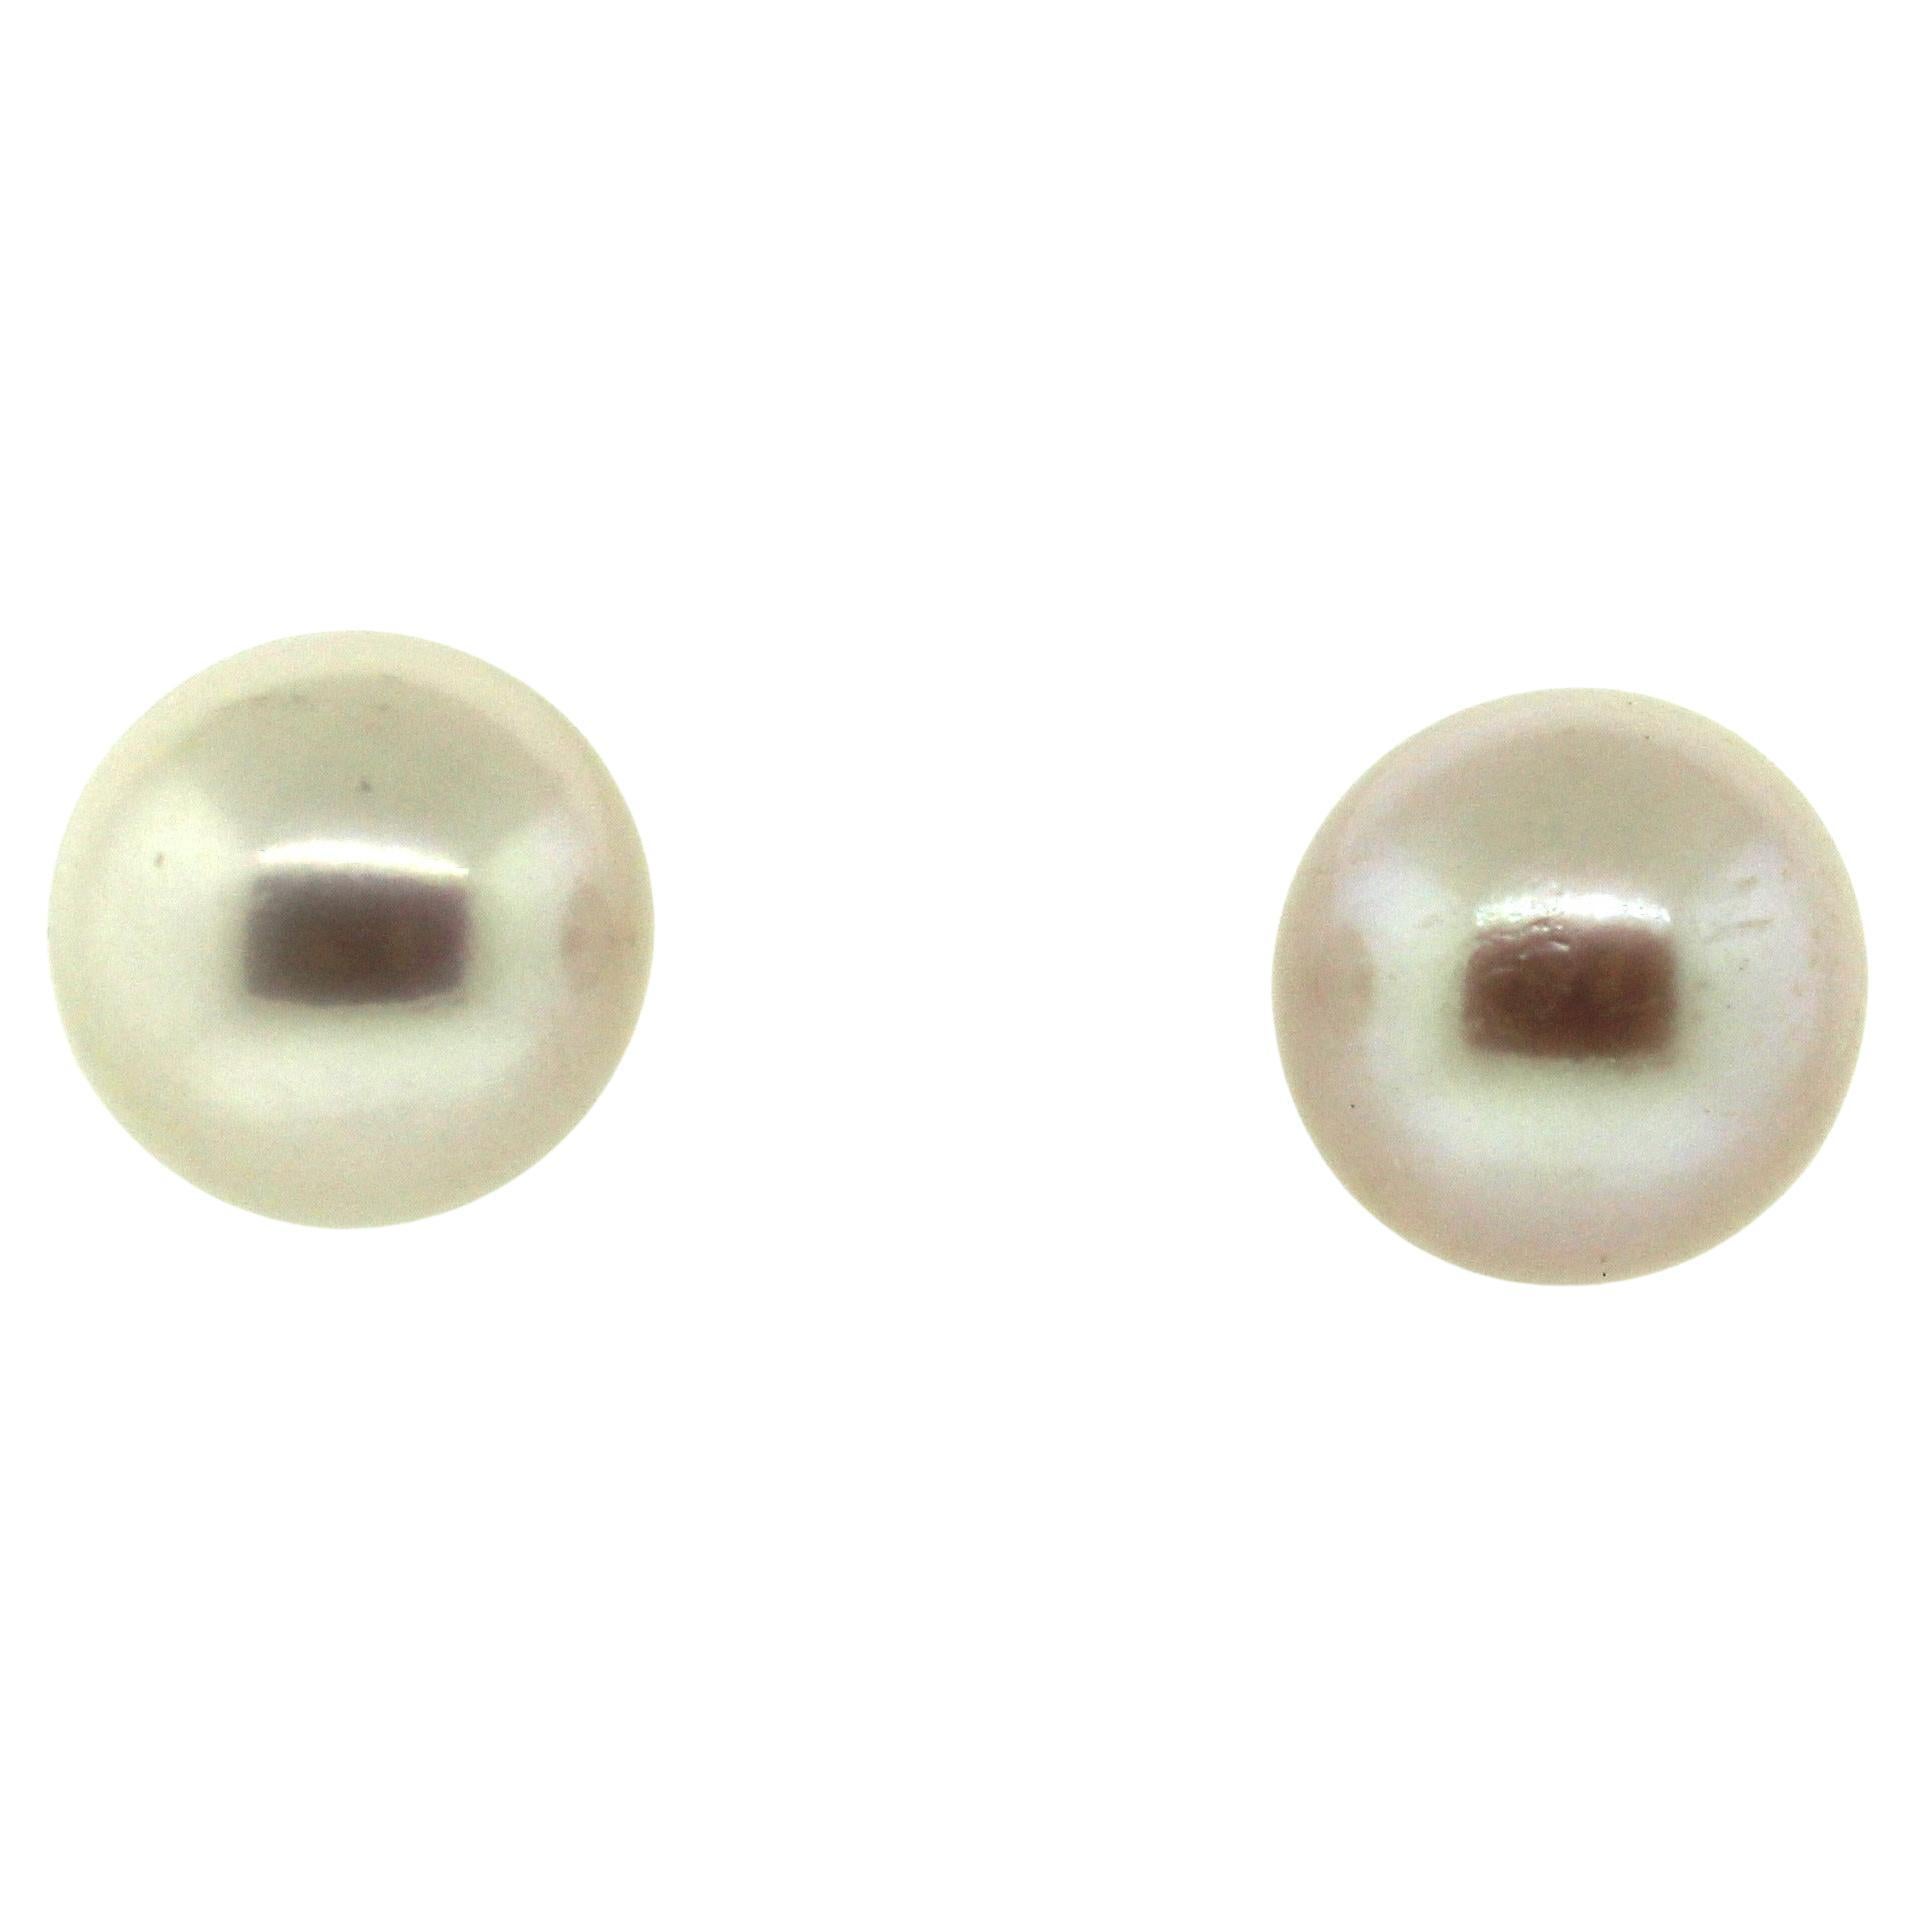 Hakimoto By Jewel Of Ocean
18K White Gold 
Total item weight 2.1 grams
9 mm Cultured Pearls
18K Yellow Gold High Polish
Orient: Very Good
Luster: Very Good
Nacre: Very Good